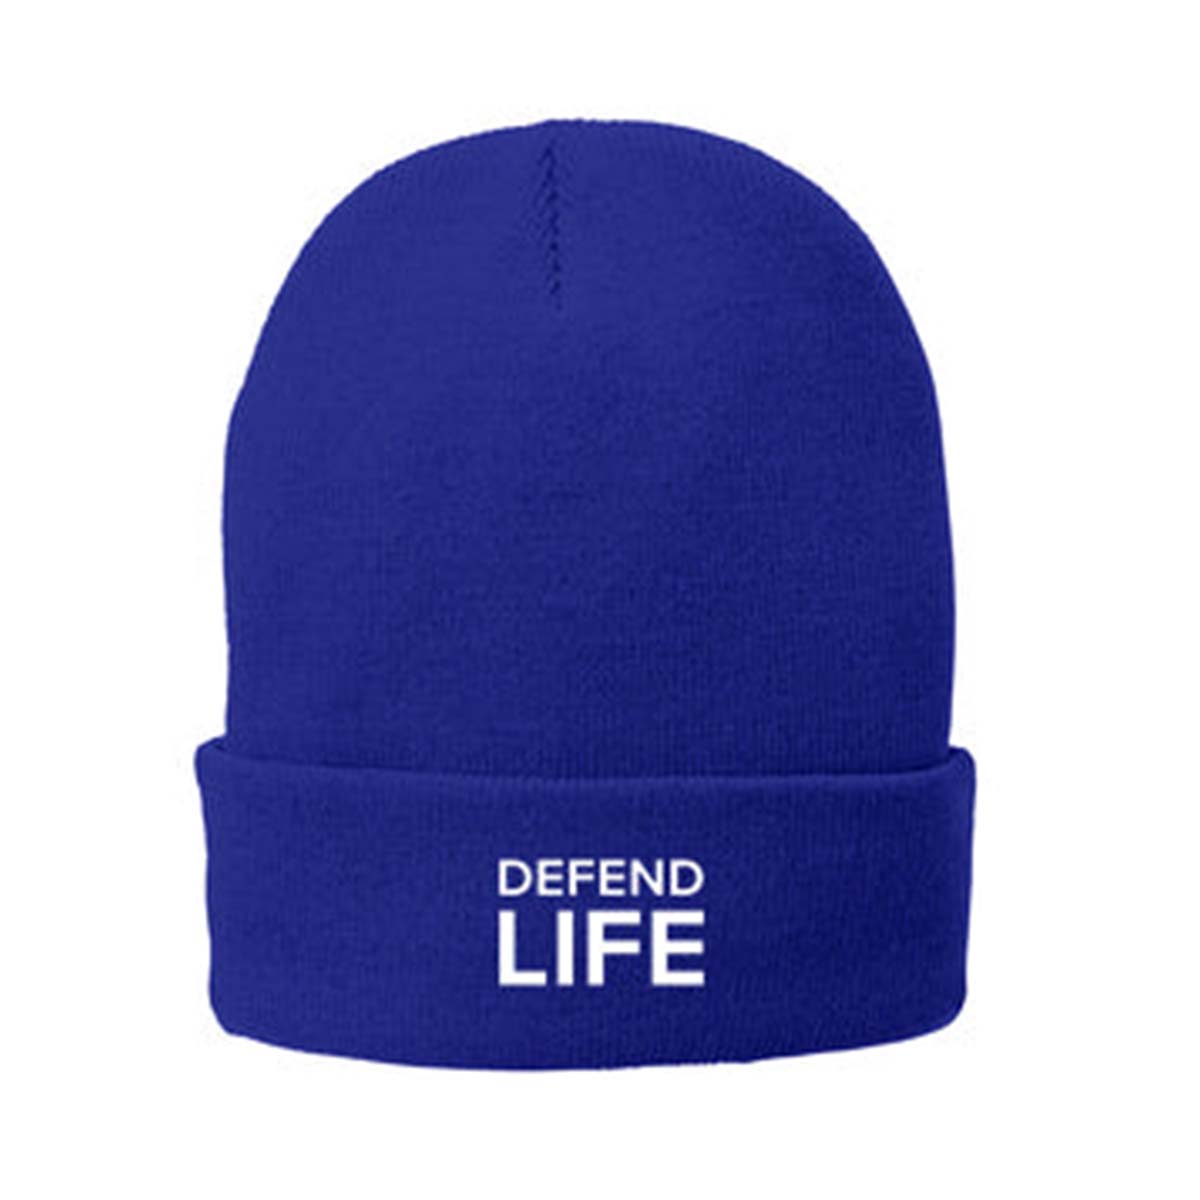 Defend Life Knit Winter Hat